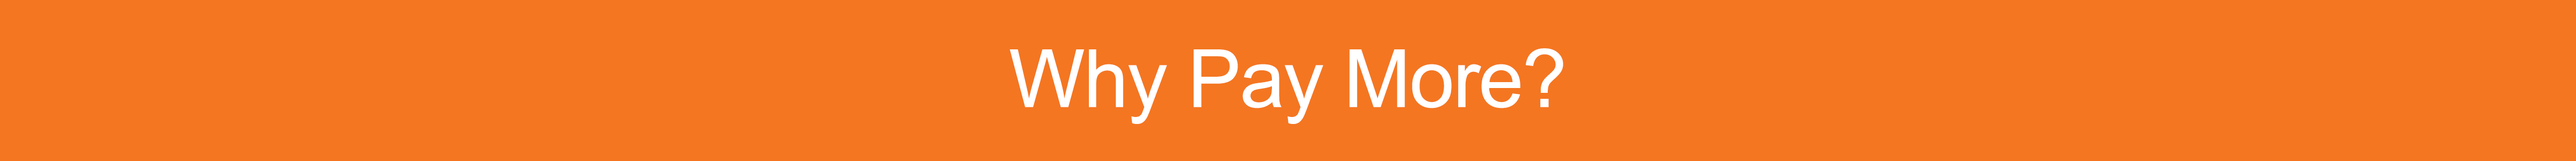 Why Pay More?